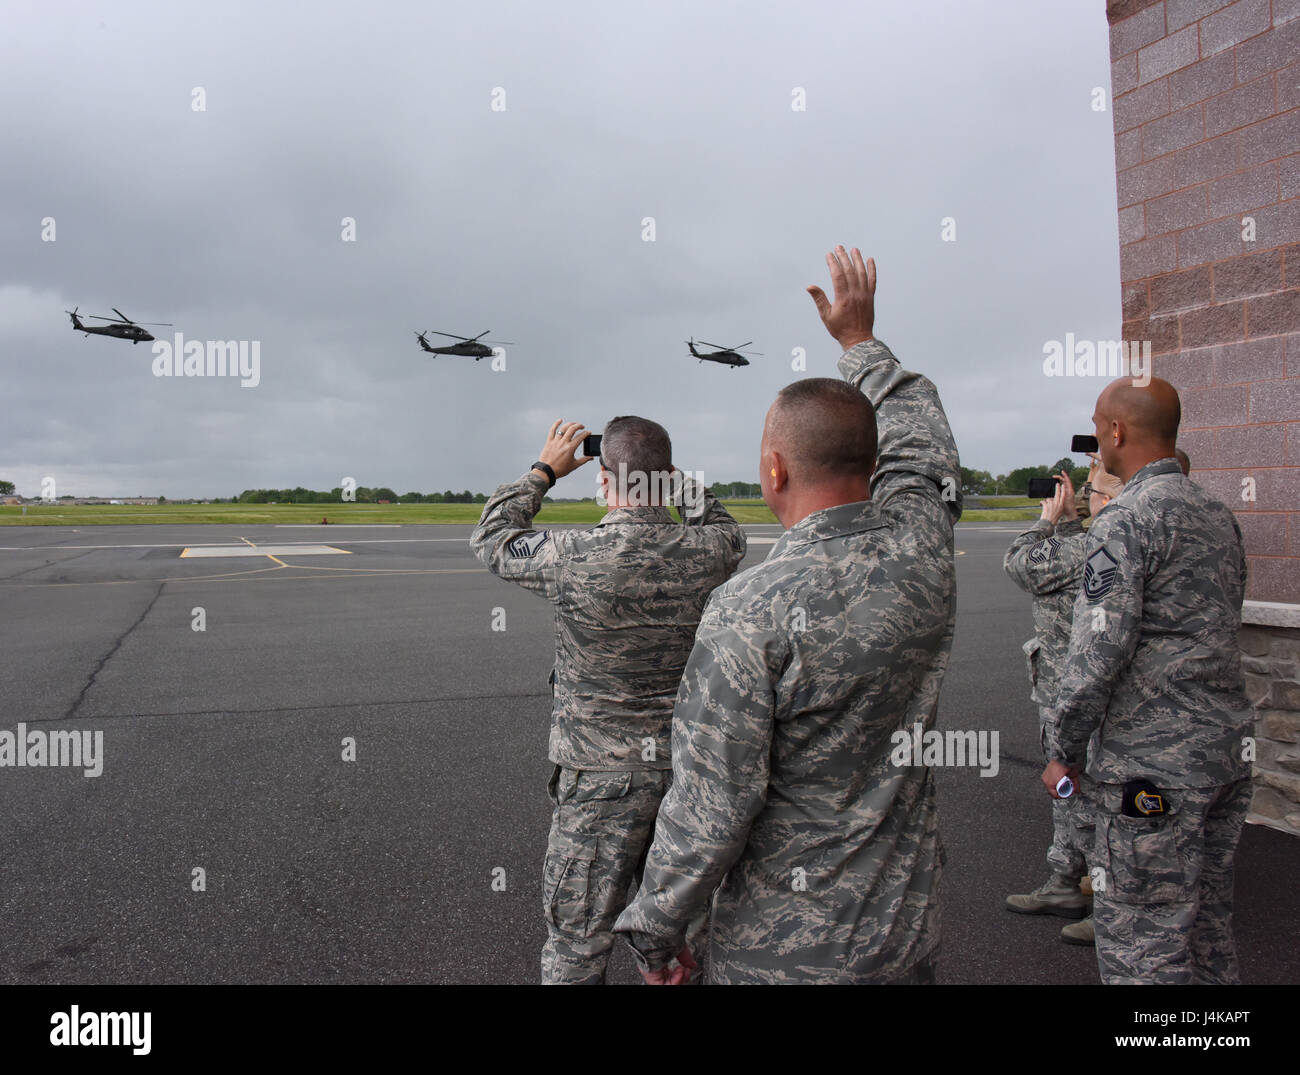 ARMY AVIATION SUPPORT FACILITY, Del. - Members of 166th Security Forces Squadron including Commander Lt. Col. Barry Strube along with Delaware National Guard State Command Chief Master Sgt. Patricia Ottinger, wave to their troops as they fly to Joint Base McGuire-Dix Lakehurst, N.J. on May 7, 2017. A four-ship formation of Blackhawk helicopters from the 238th Aviation Regiment, Delaware National Guard, provided airlift of approximately 40 security forces personnel from the DNG Army Aviation Support Facility to Fort Dix. Delaware Air National Guard security defenders will spend eleven days cond Stock Photo